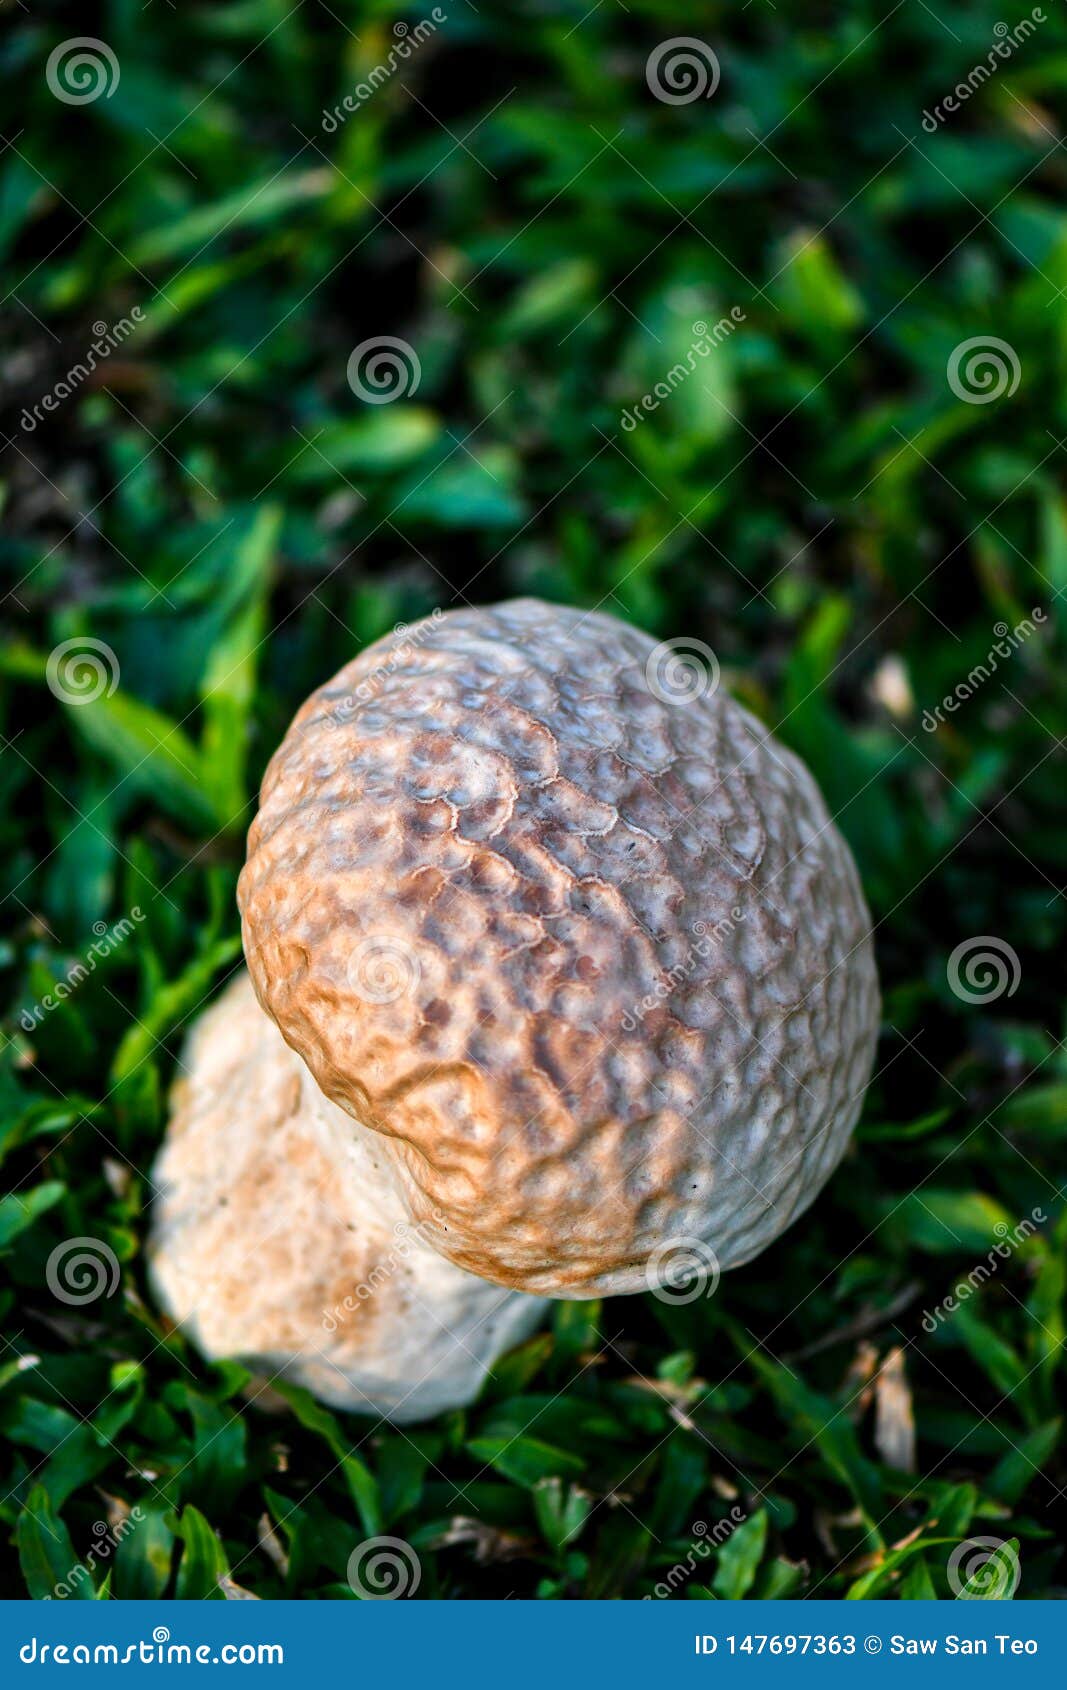 Brain Puffball Is A Species Of Mushroom Stock Image Image Of